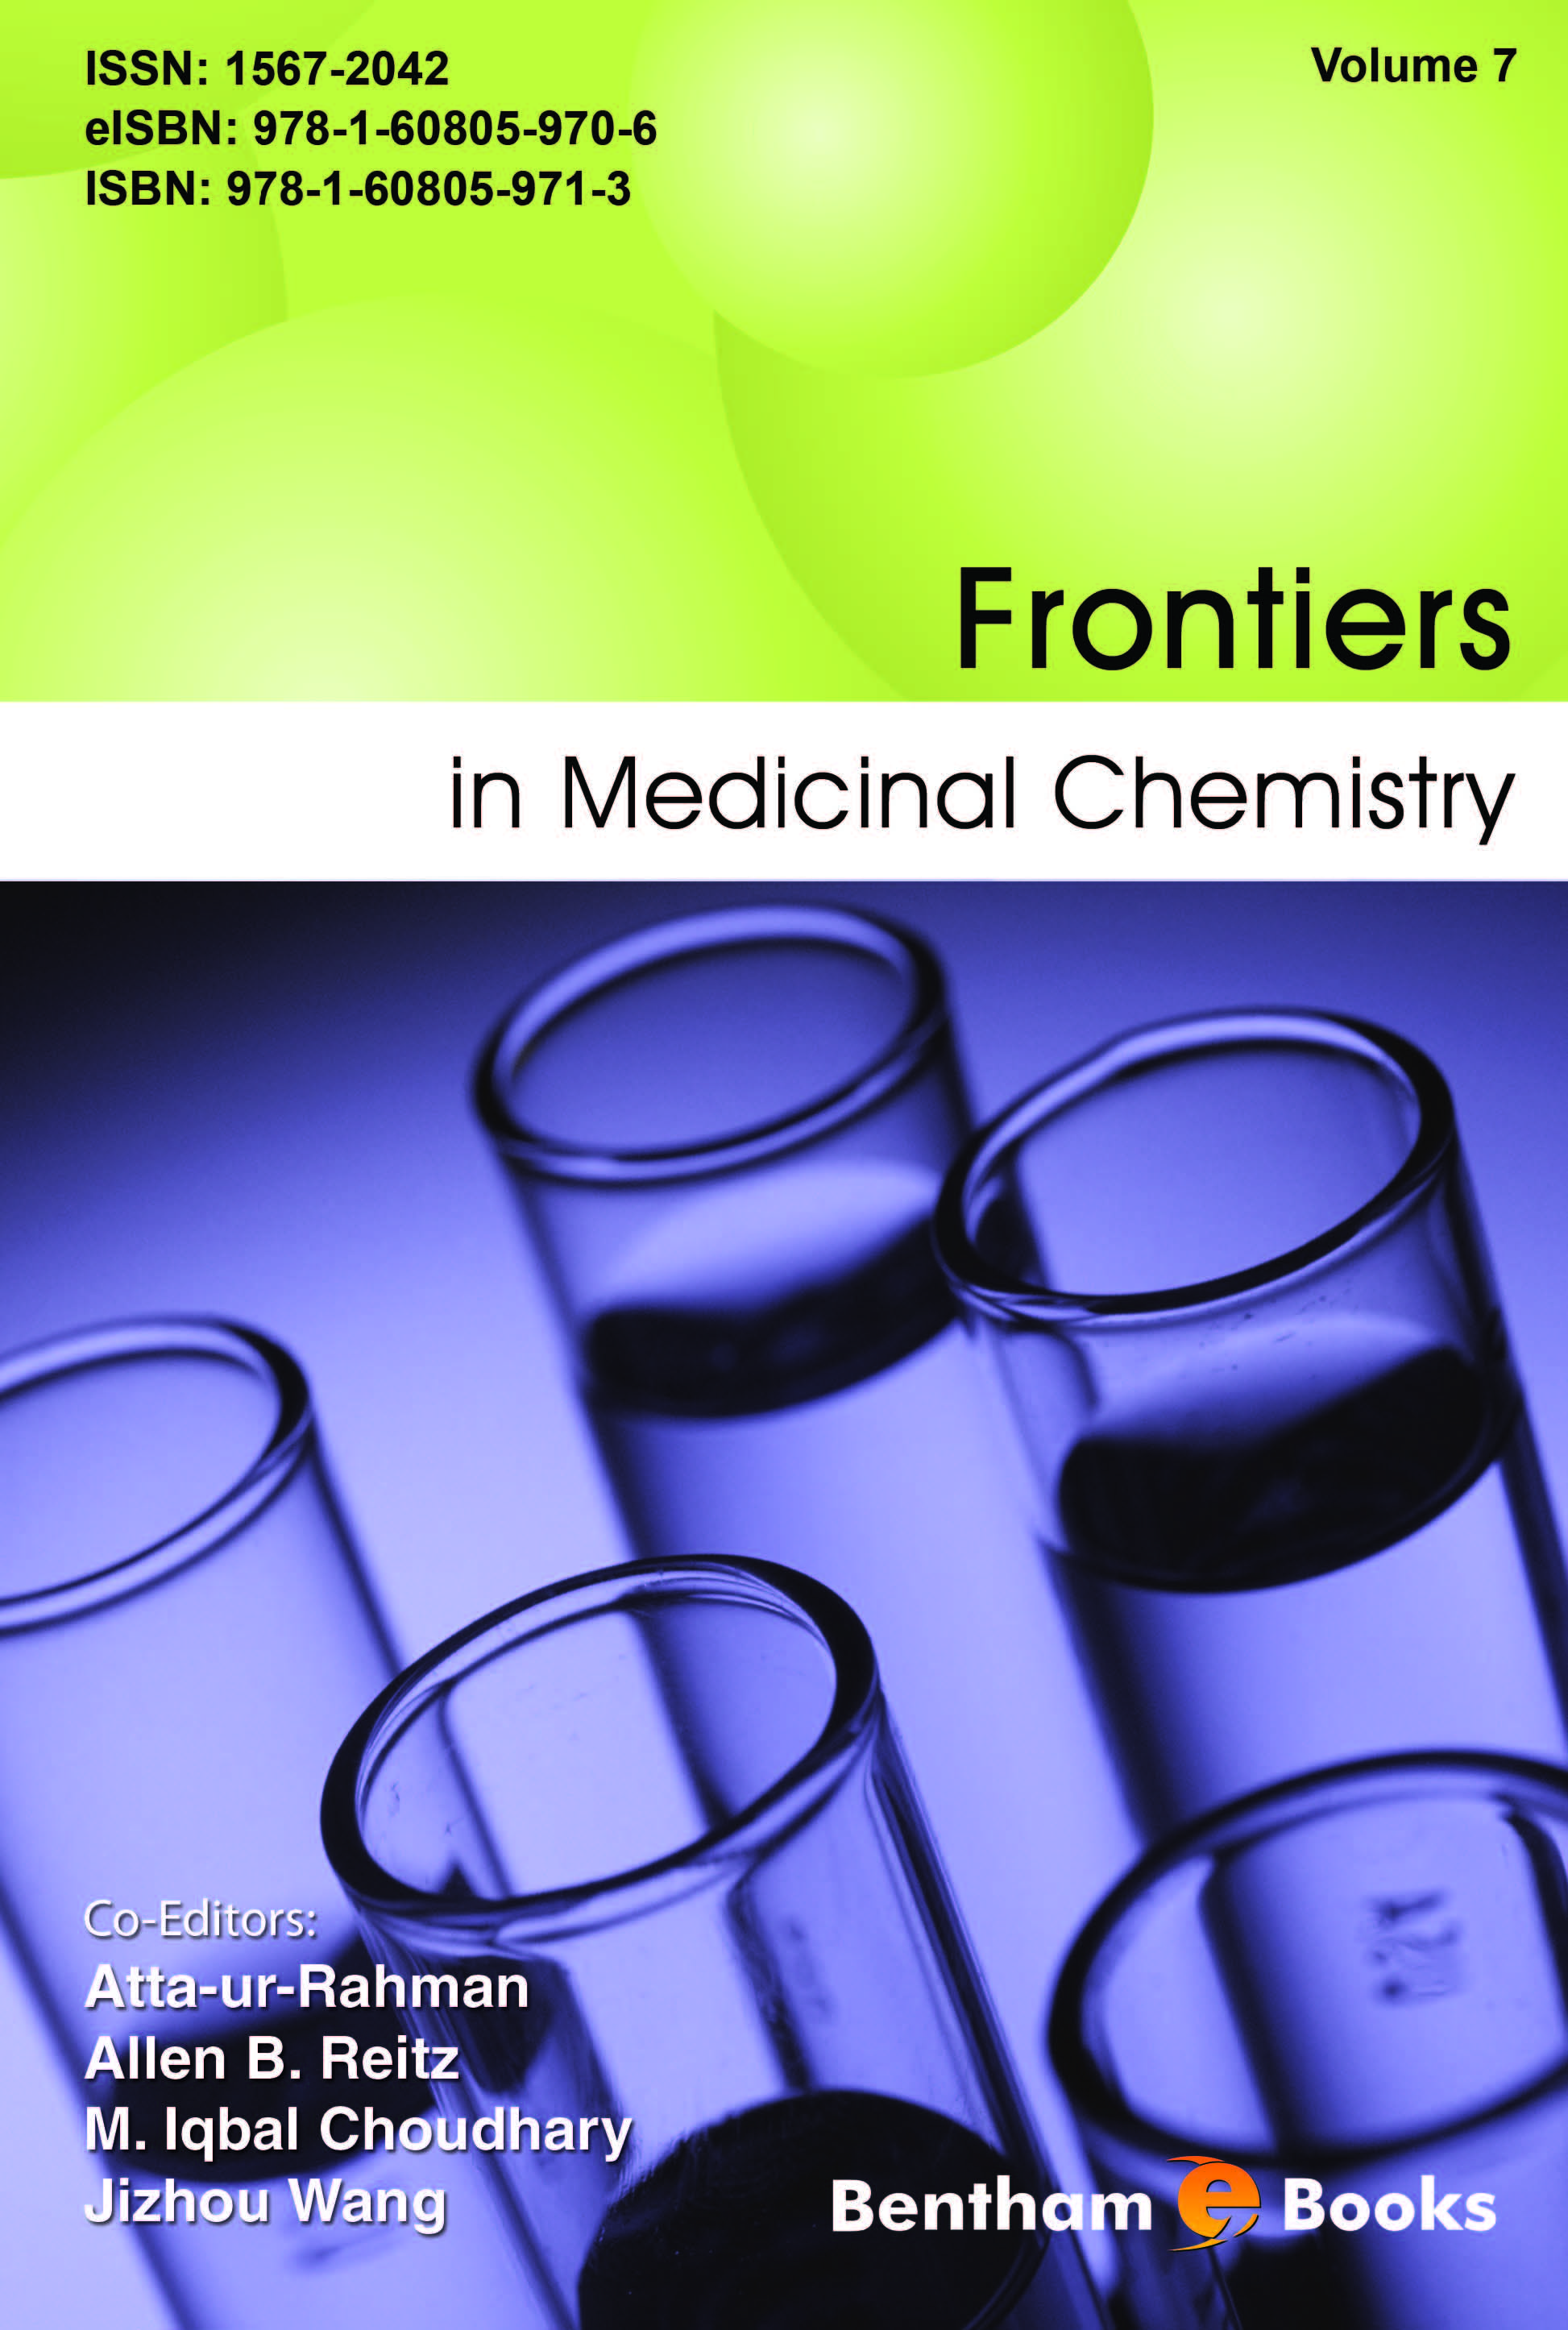 Frontiers in Medicinal Chemistry